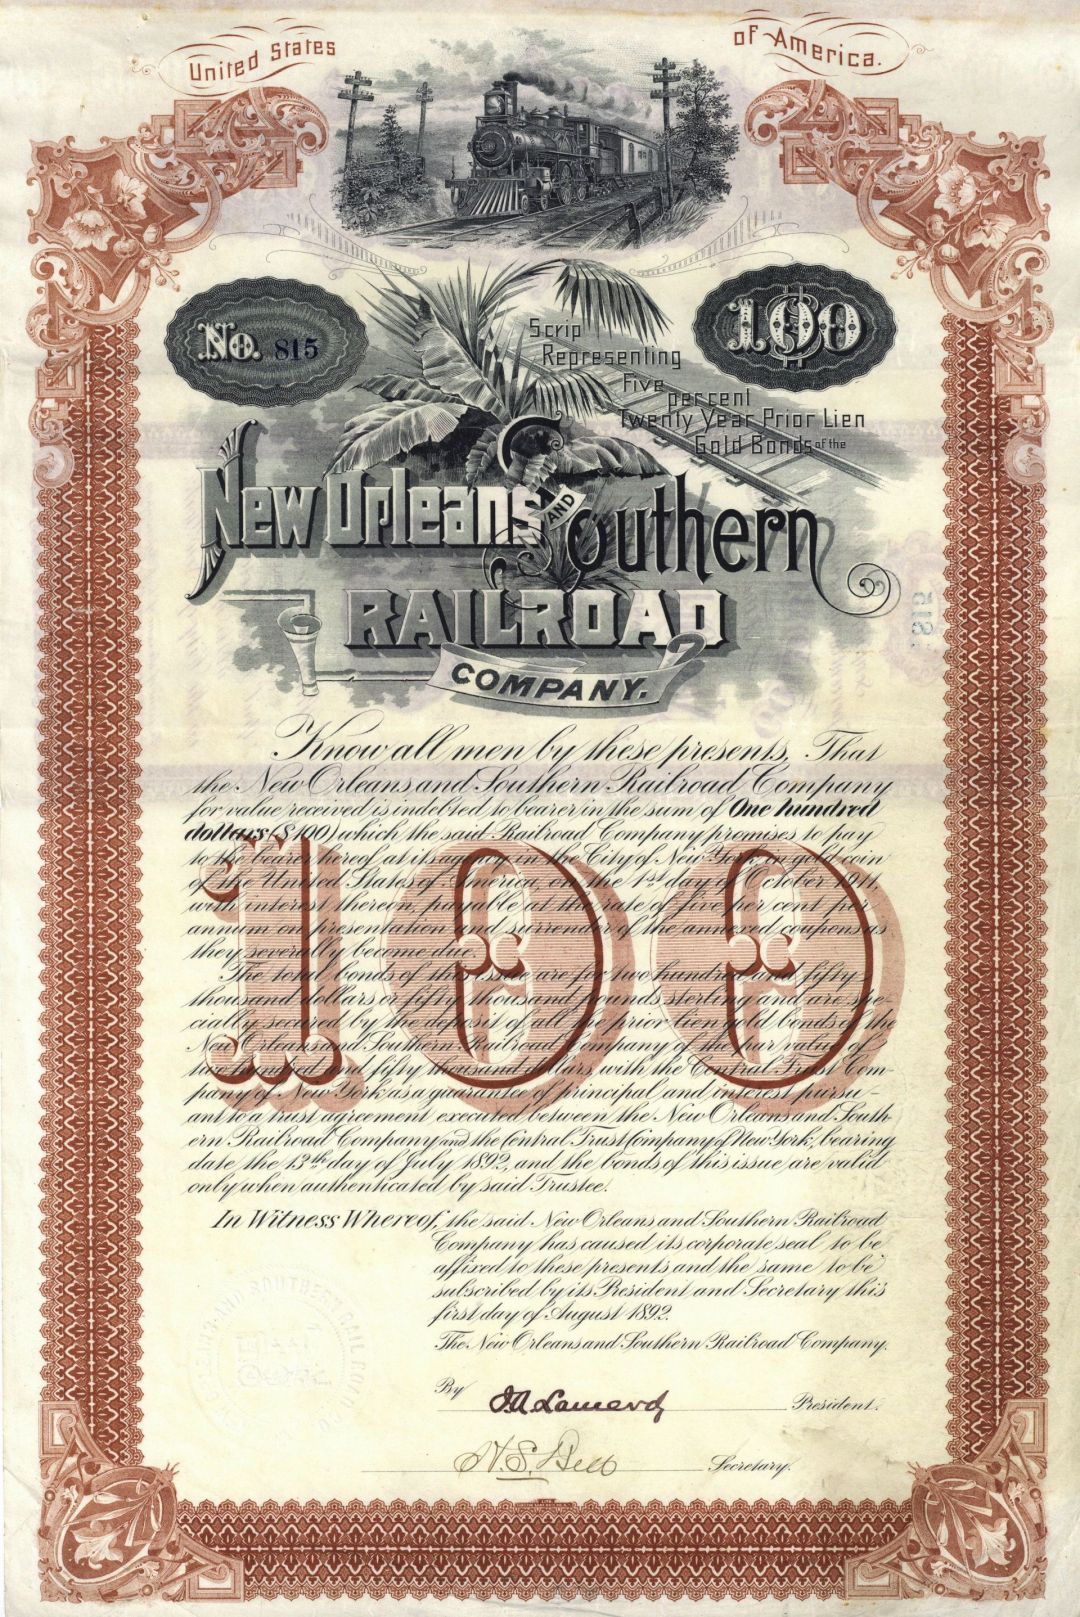 New Orleans and Southern Railroad Co. - $100 Uncanceled Railway Gold Bond